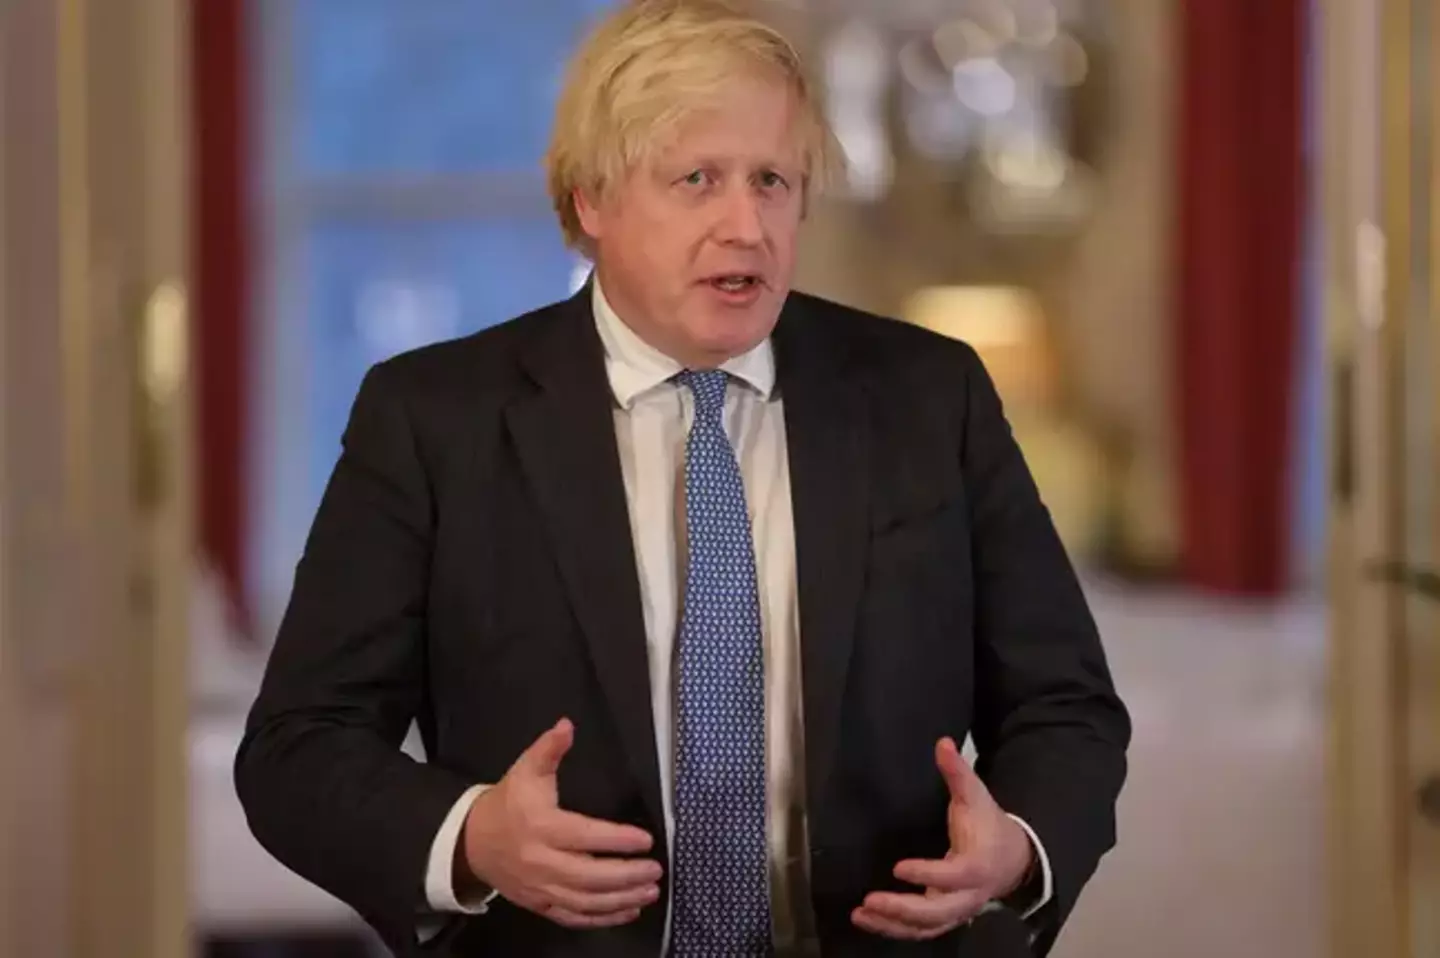 Boris Johnson previously denied he was aware of Covid rule-breaking at Downing Street.